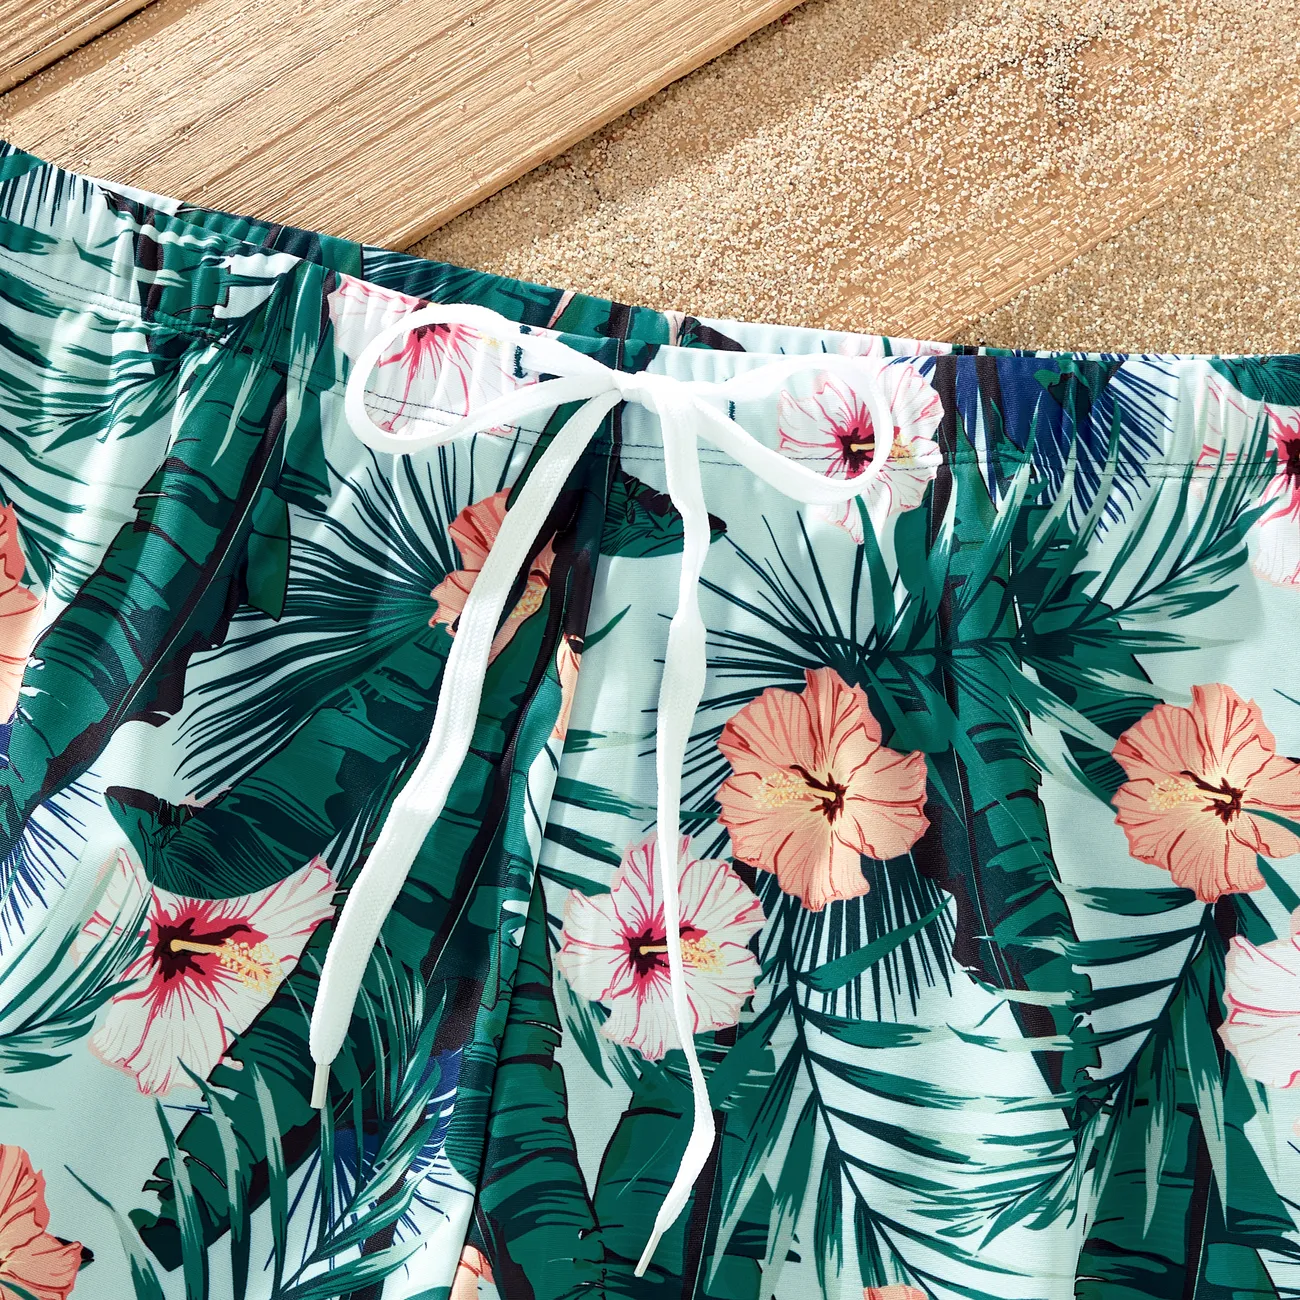 Family Matching Plant Print Ruffle Trim Spliced One-piece Swimsuit or Swim Trunks Green big image 1